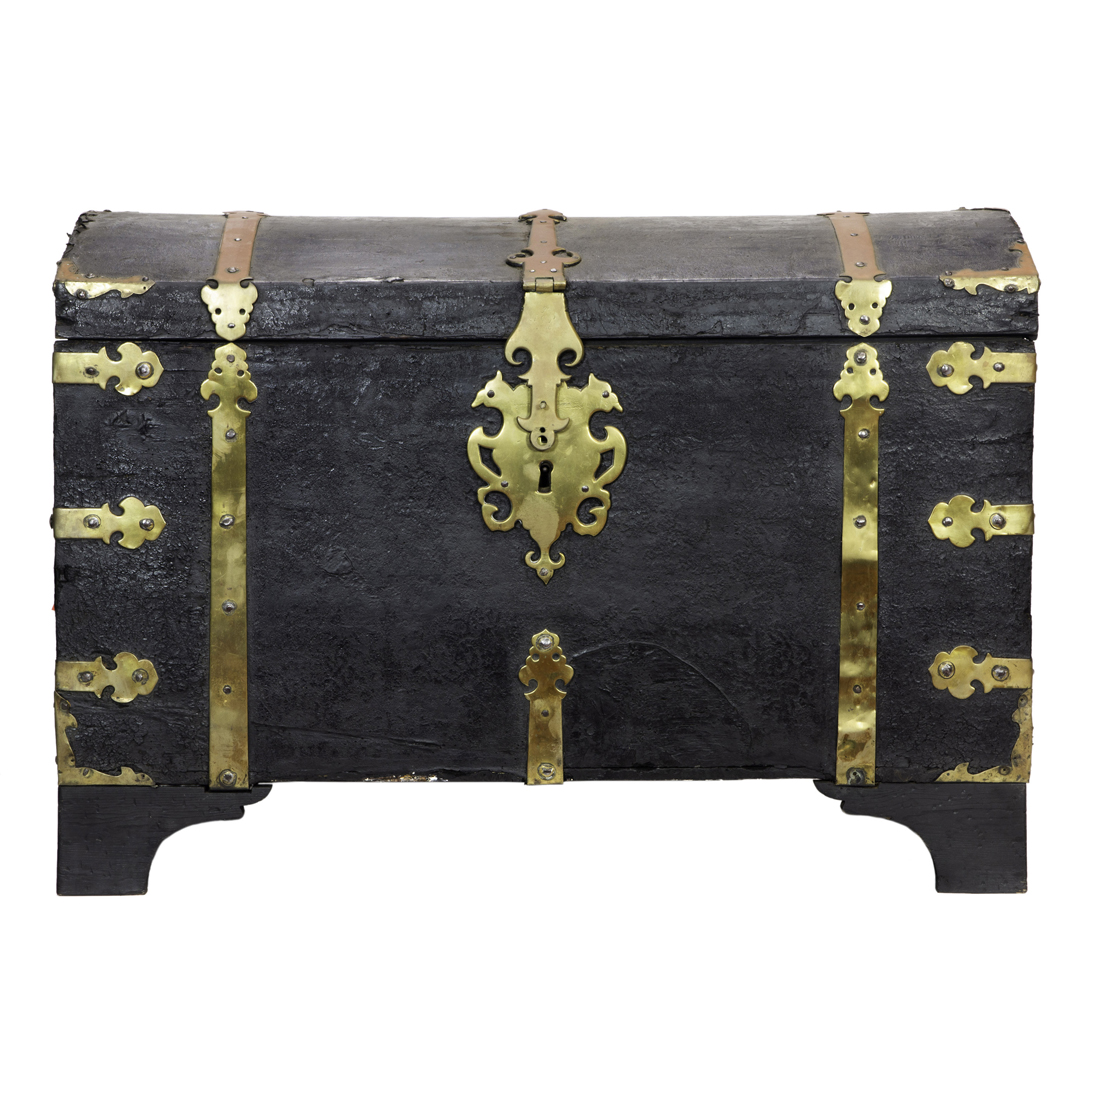 A GERMAN LEATHER AND BRASS CHEST